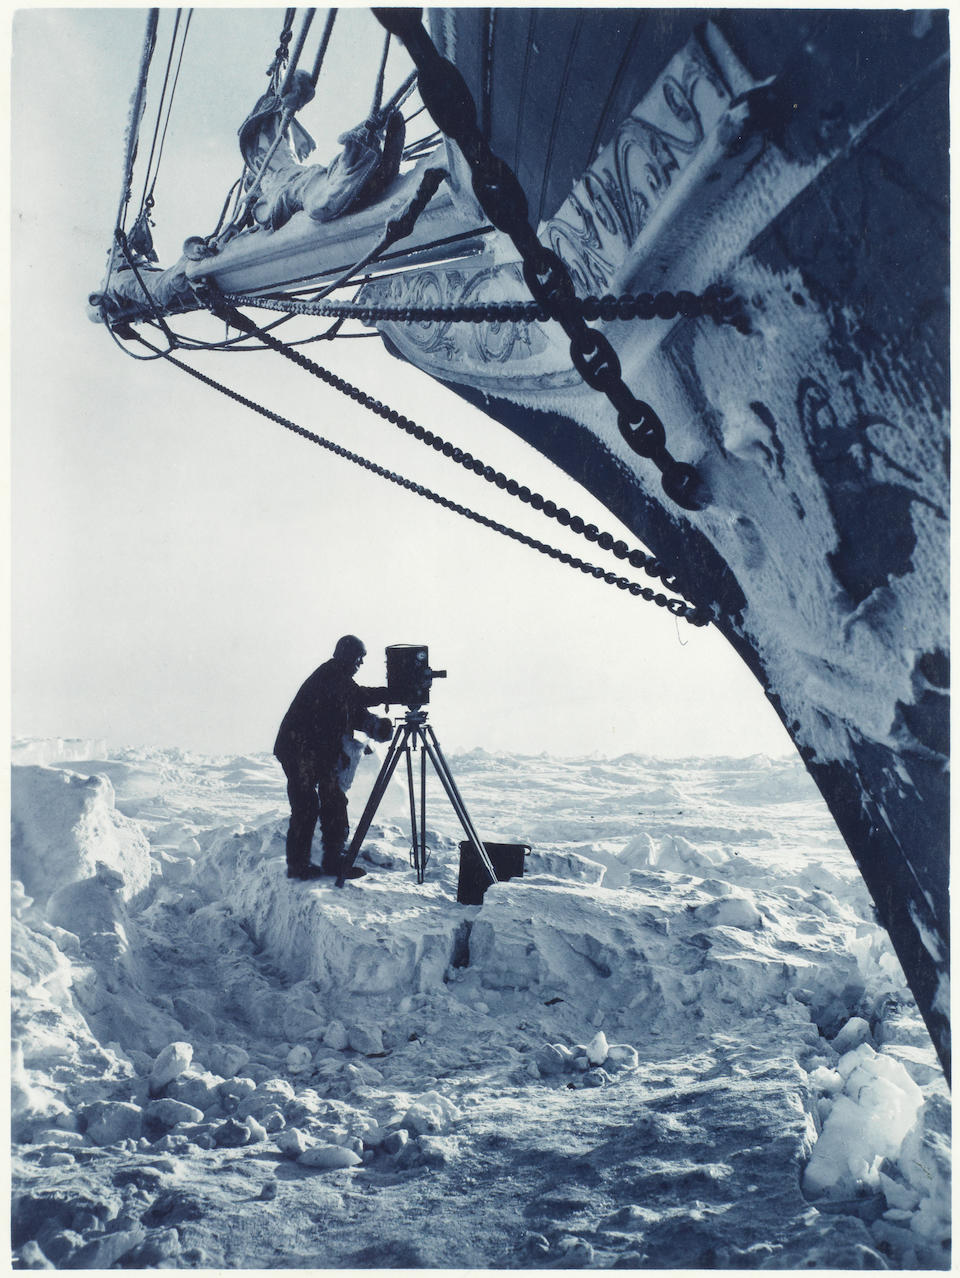 HURLEY (FRANK) Photographs of Scenes and Incidents in Connection with the Happenings to the Weddell Sea Party, 1914, 1915, 1916, [1917]